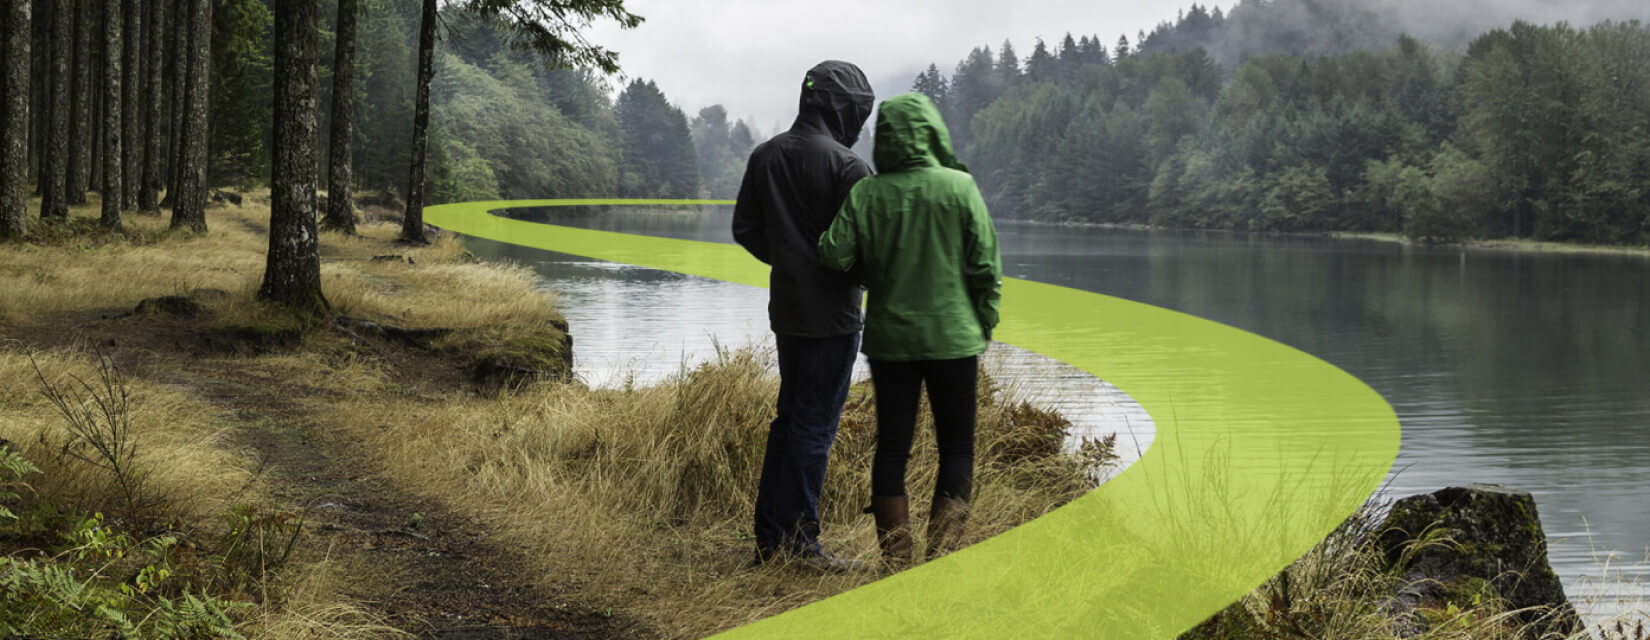 couple stood facing a river on a rainy day. A yellow pathway graphic overlaid curves away into the distance.